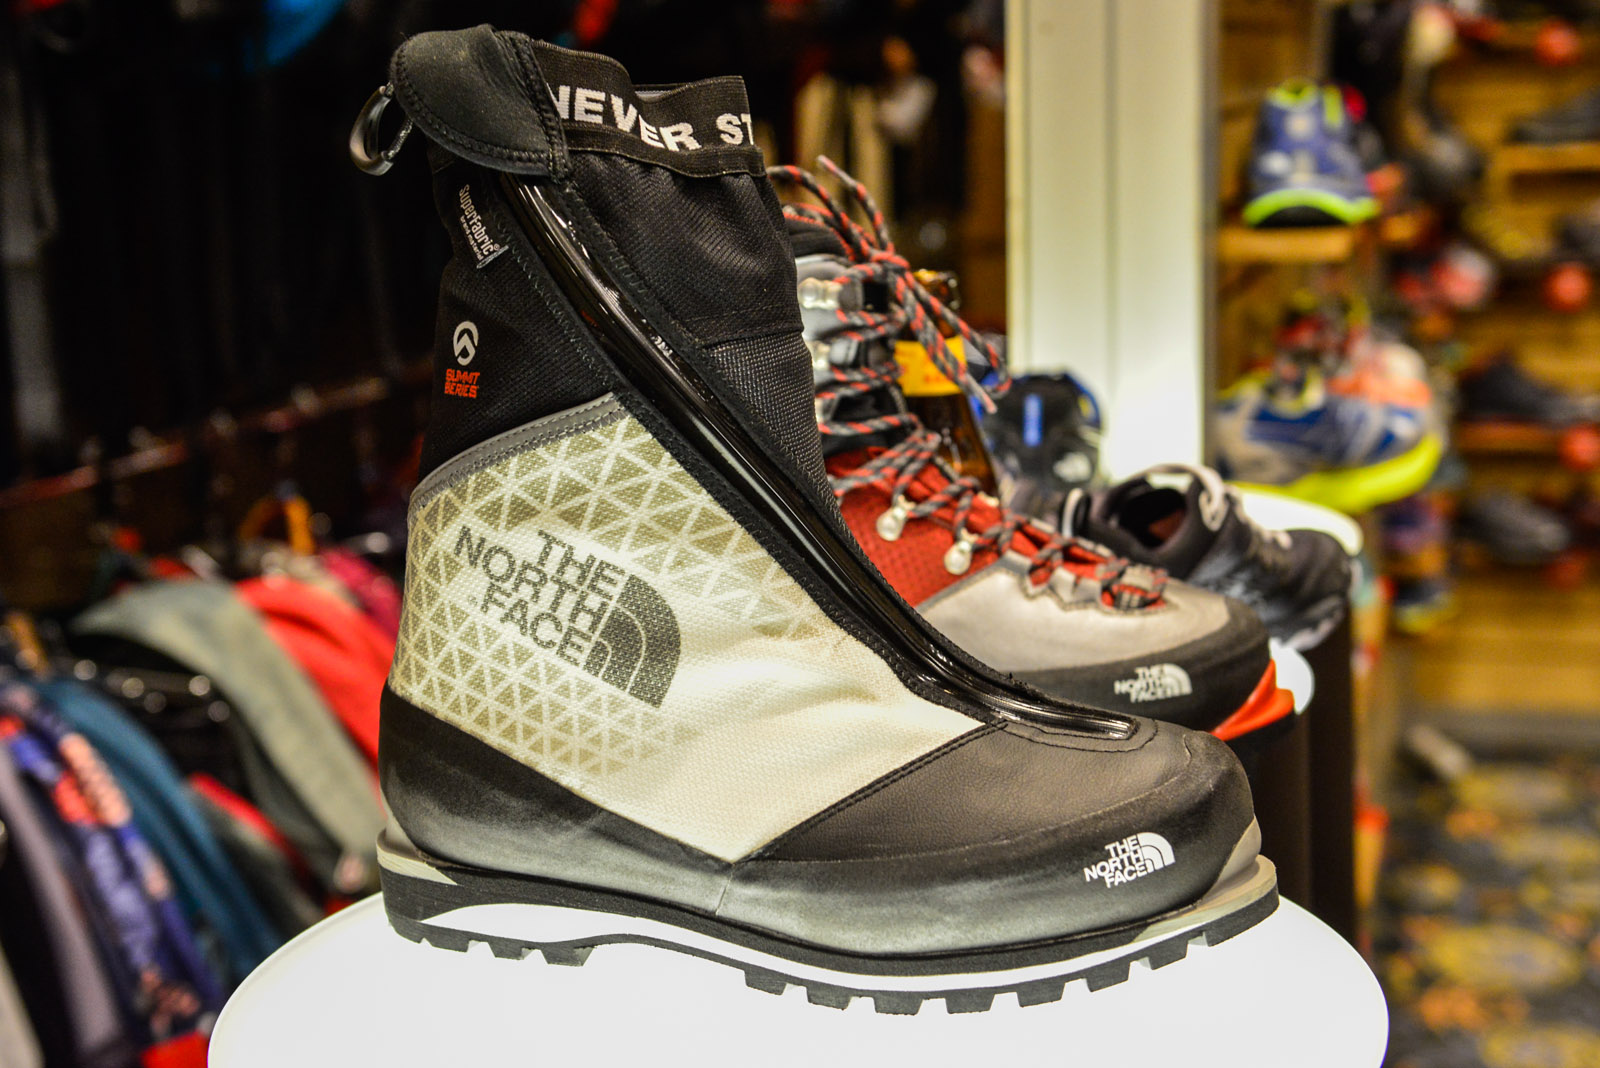 The North Face Verto S6K Exterme 